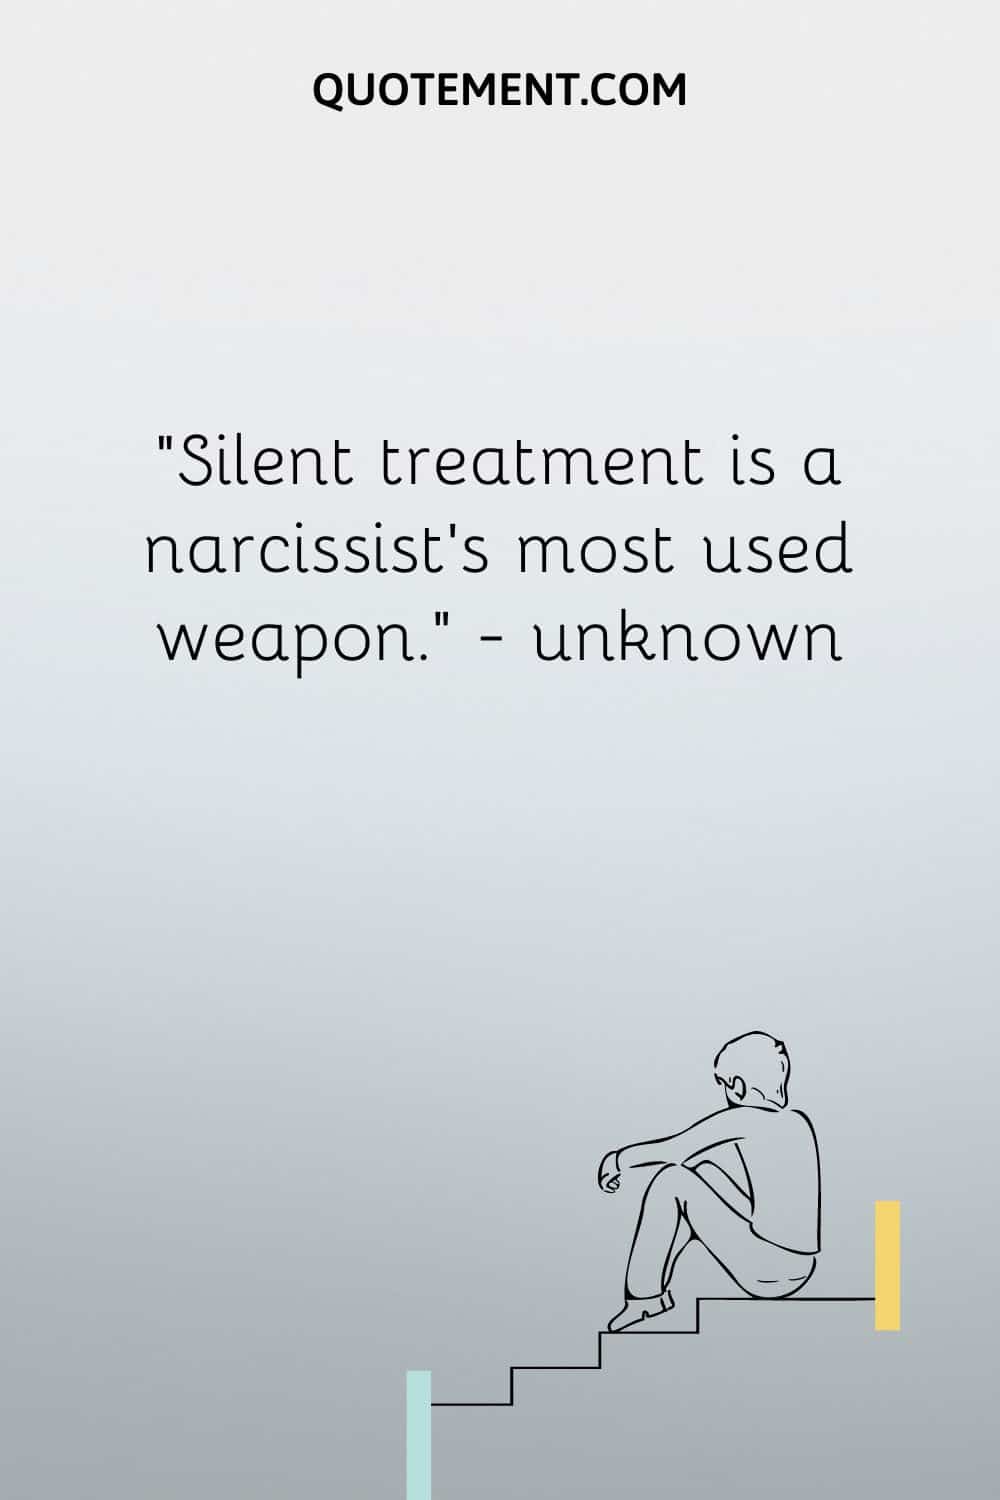 Silent treatment is a narcissist’s most used weapon